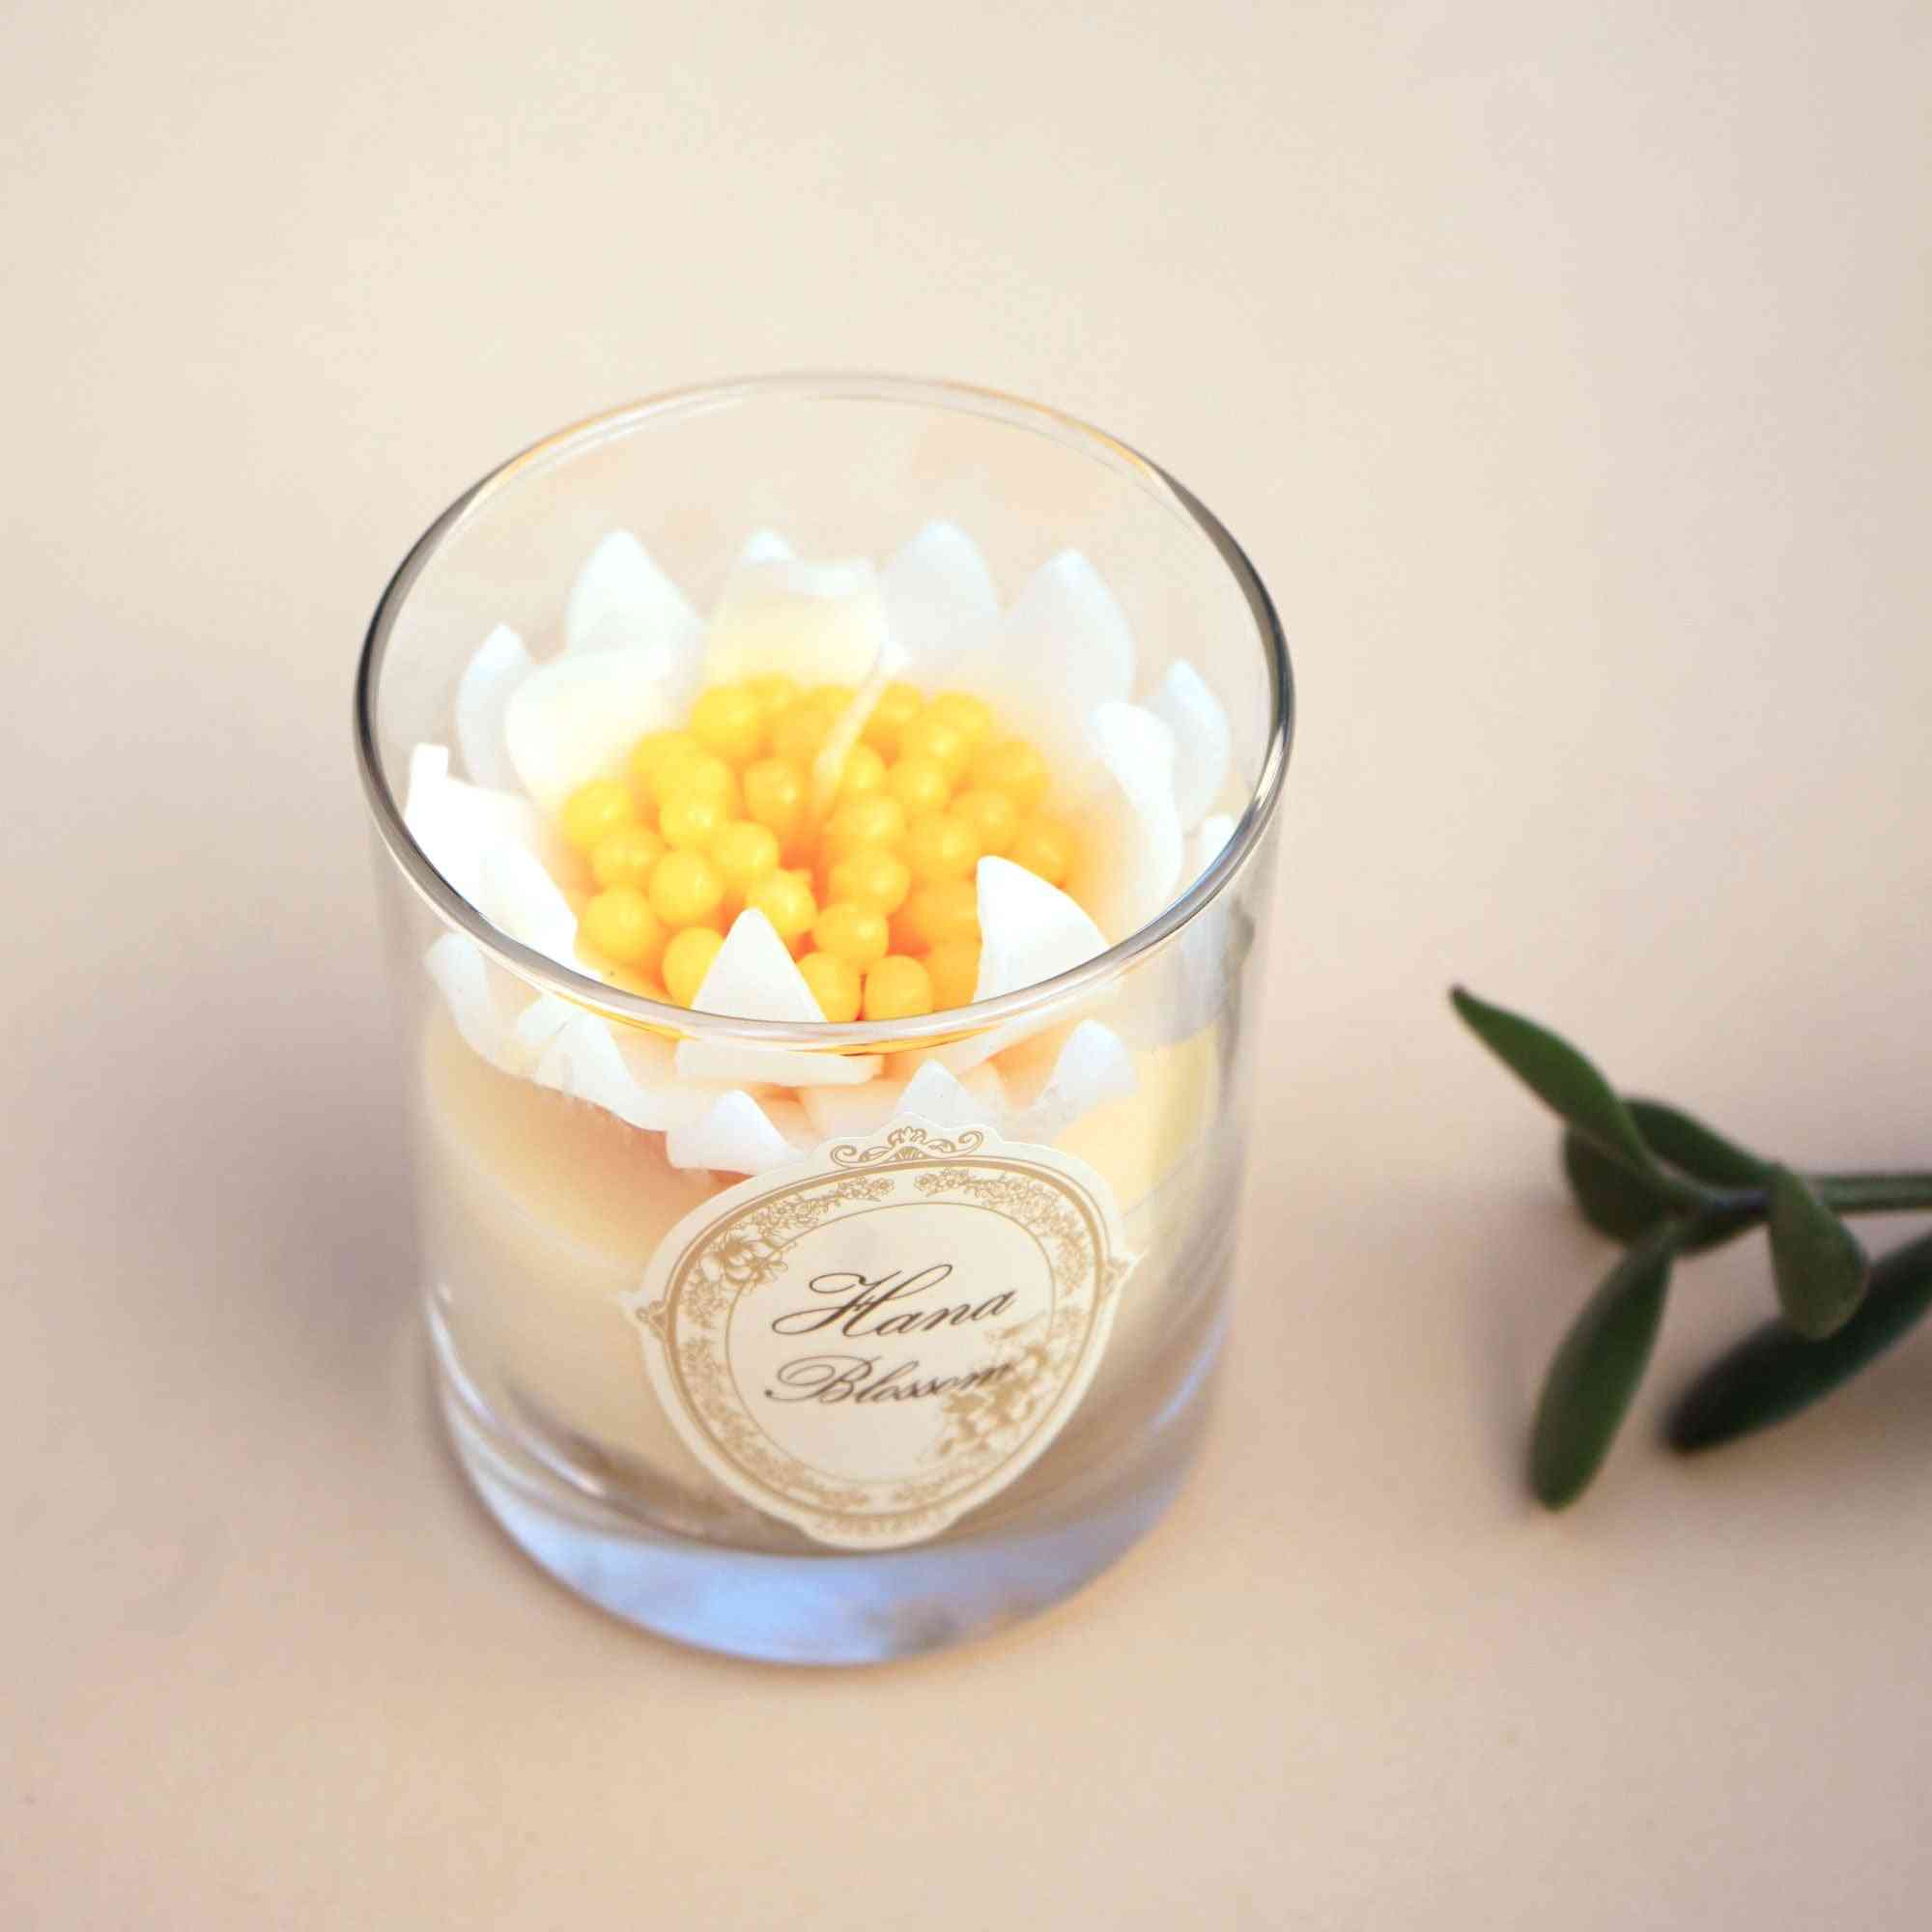 Eastern Spice Scented - Soy Wax Containter Candle